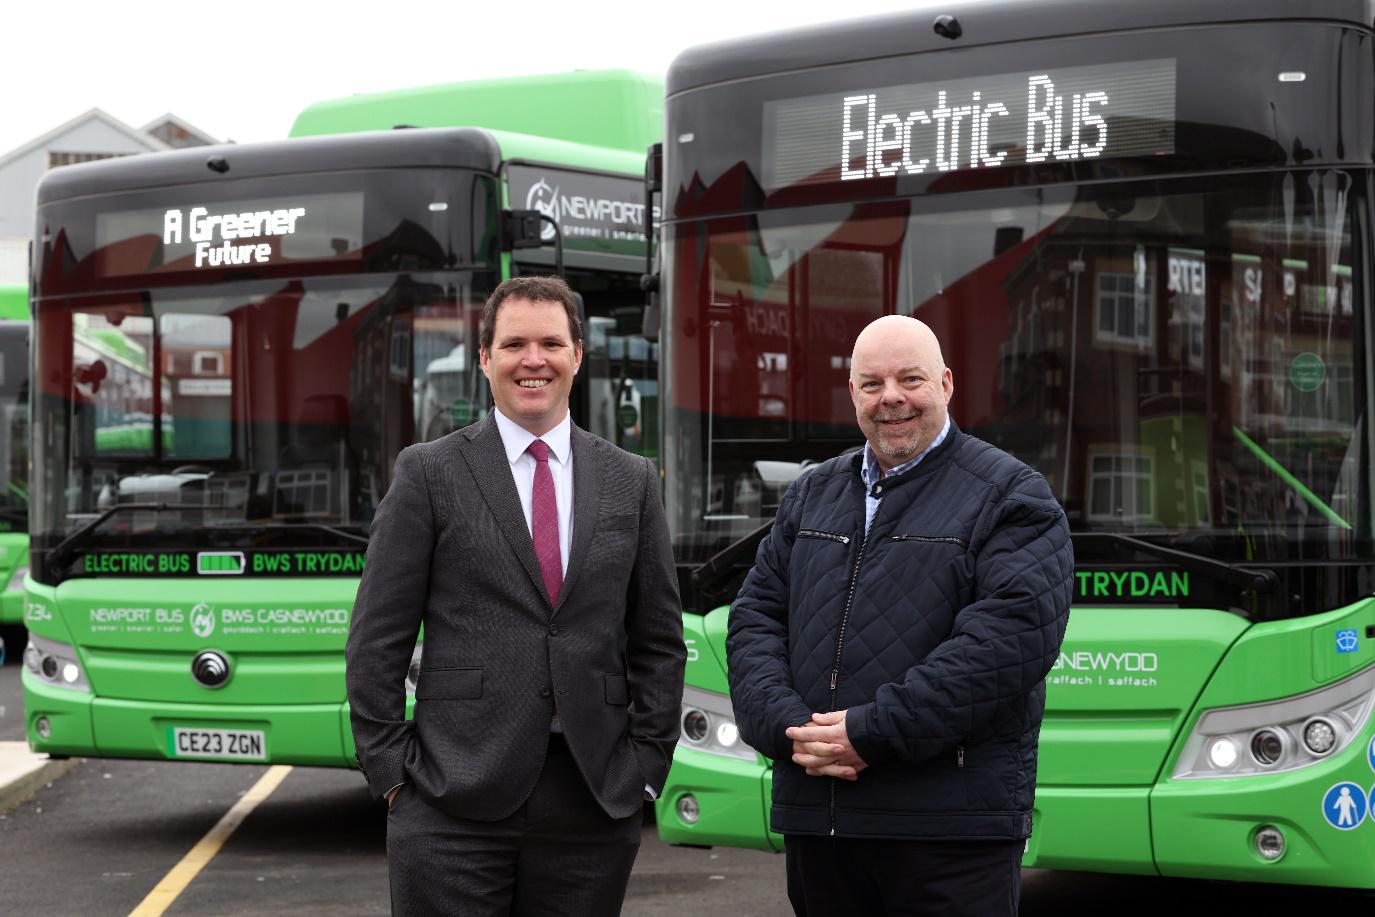 Newport presents new electric Yutongs to Minister